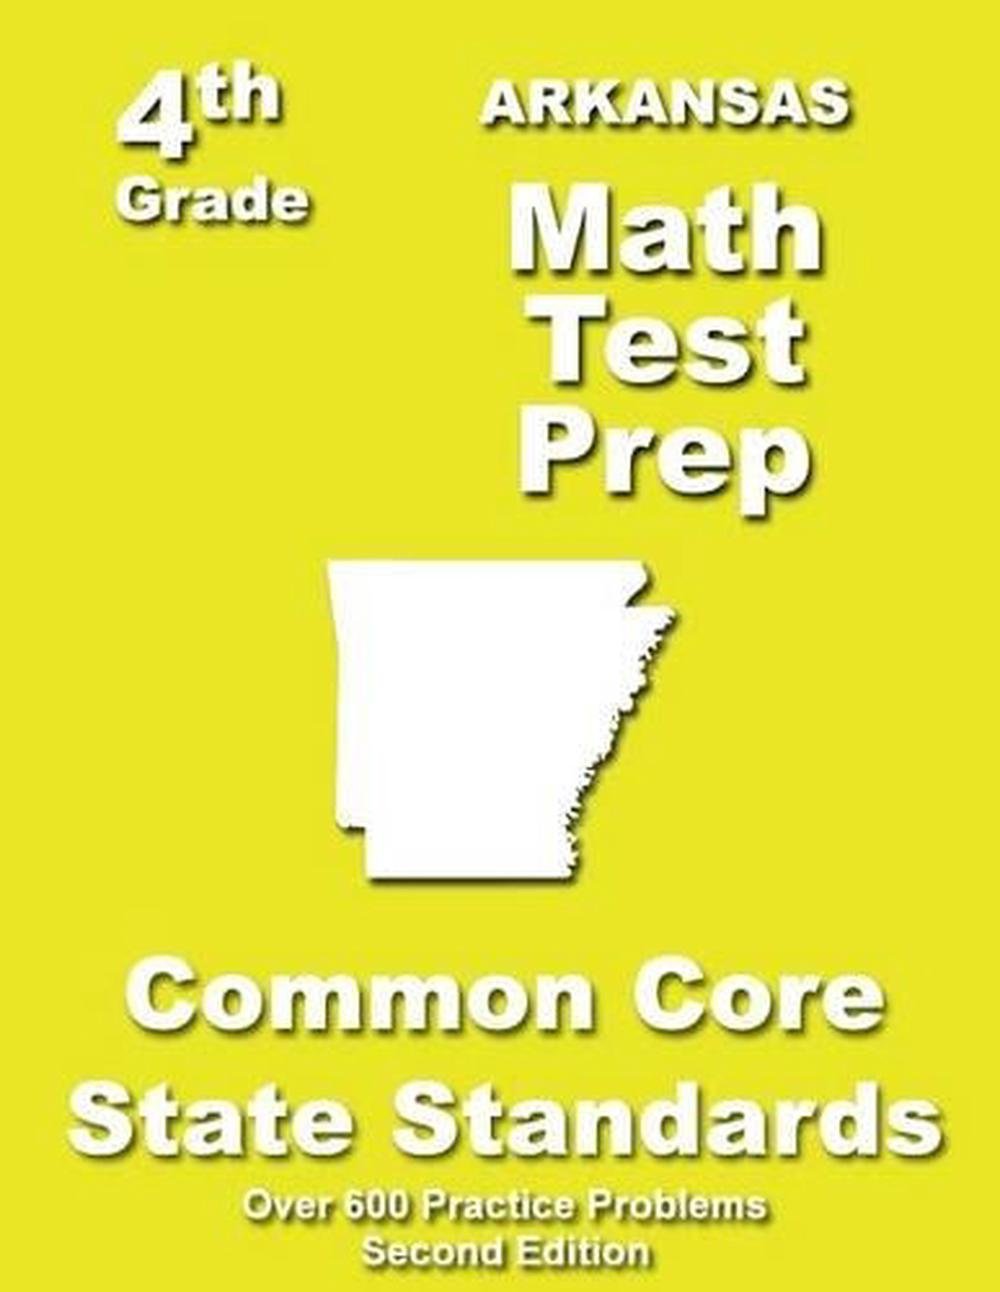 Arkansas 4th Grade Math Test Prep Common Core Learning Standards by